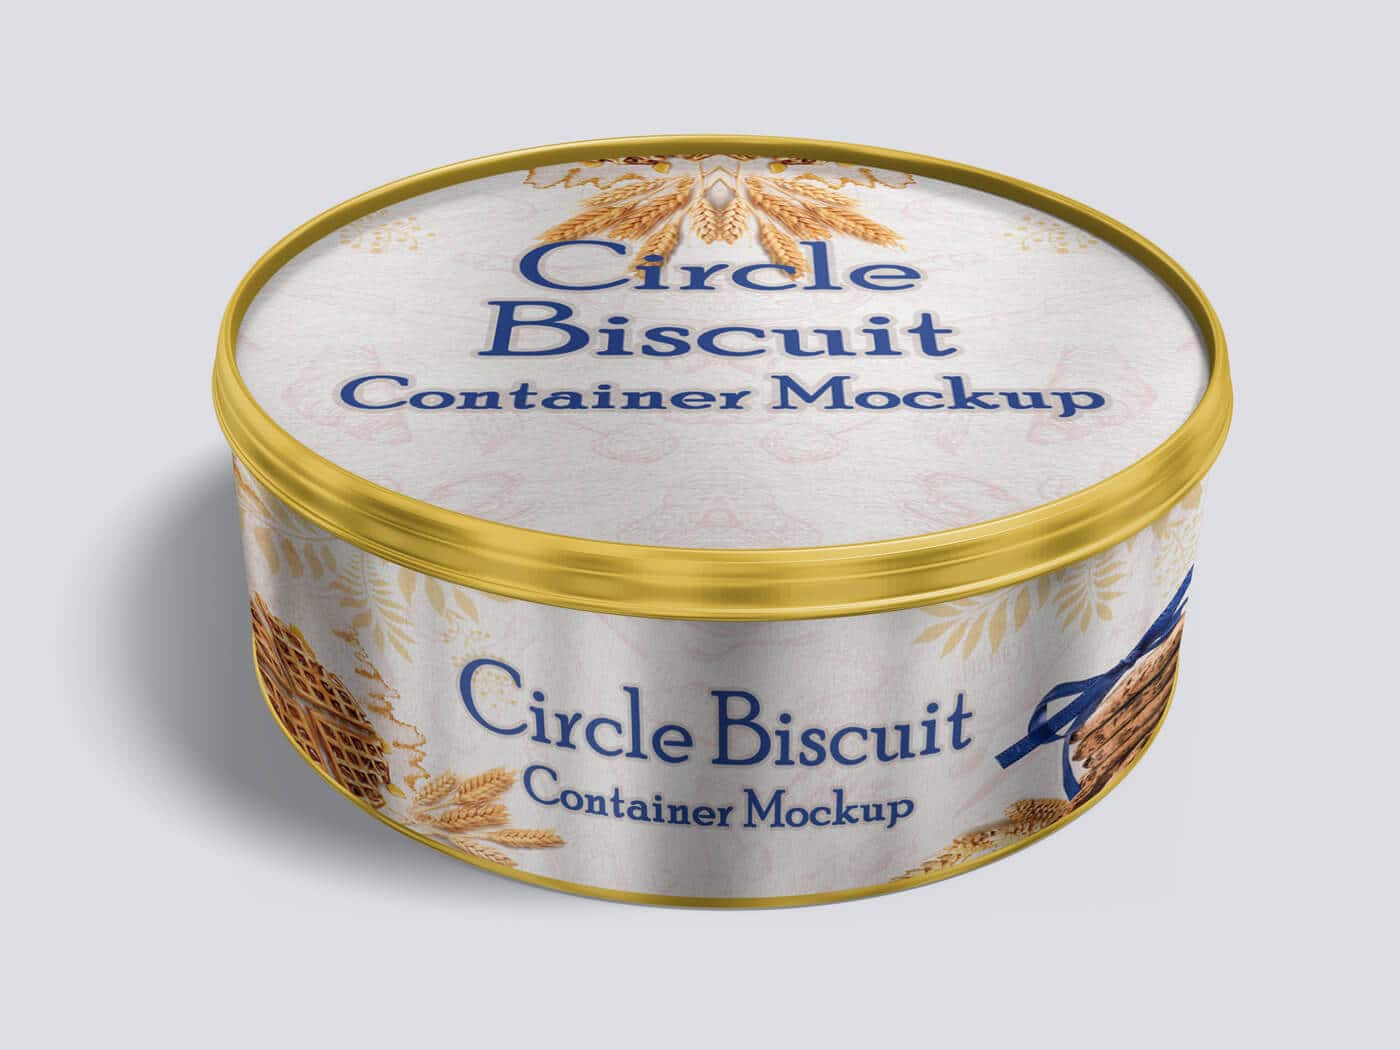 Circle-Biscuit-and-Cookies-Tin-Container-Mockup-02